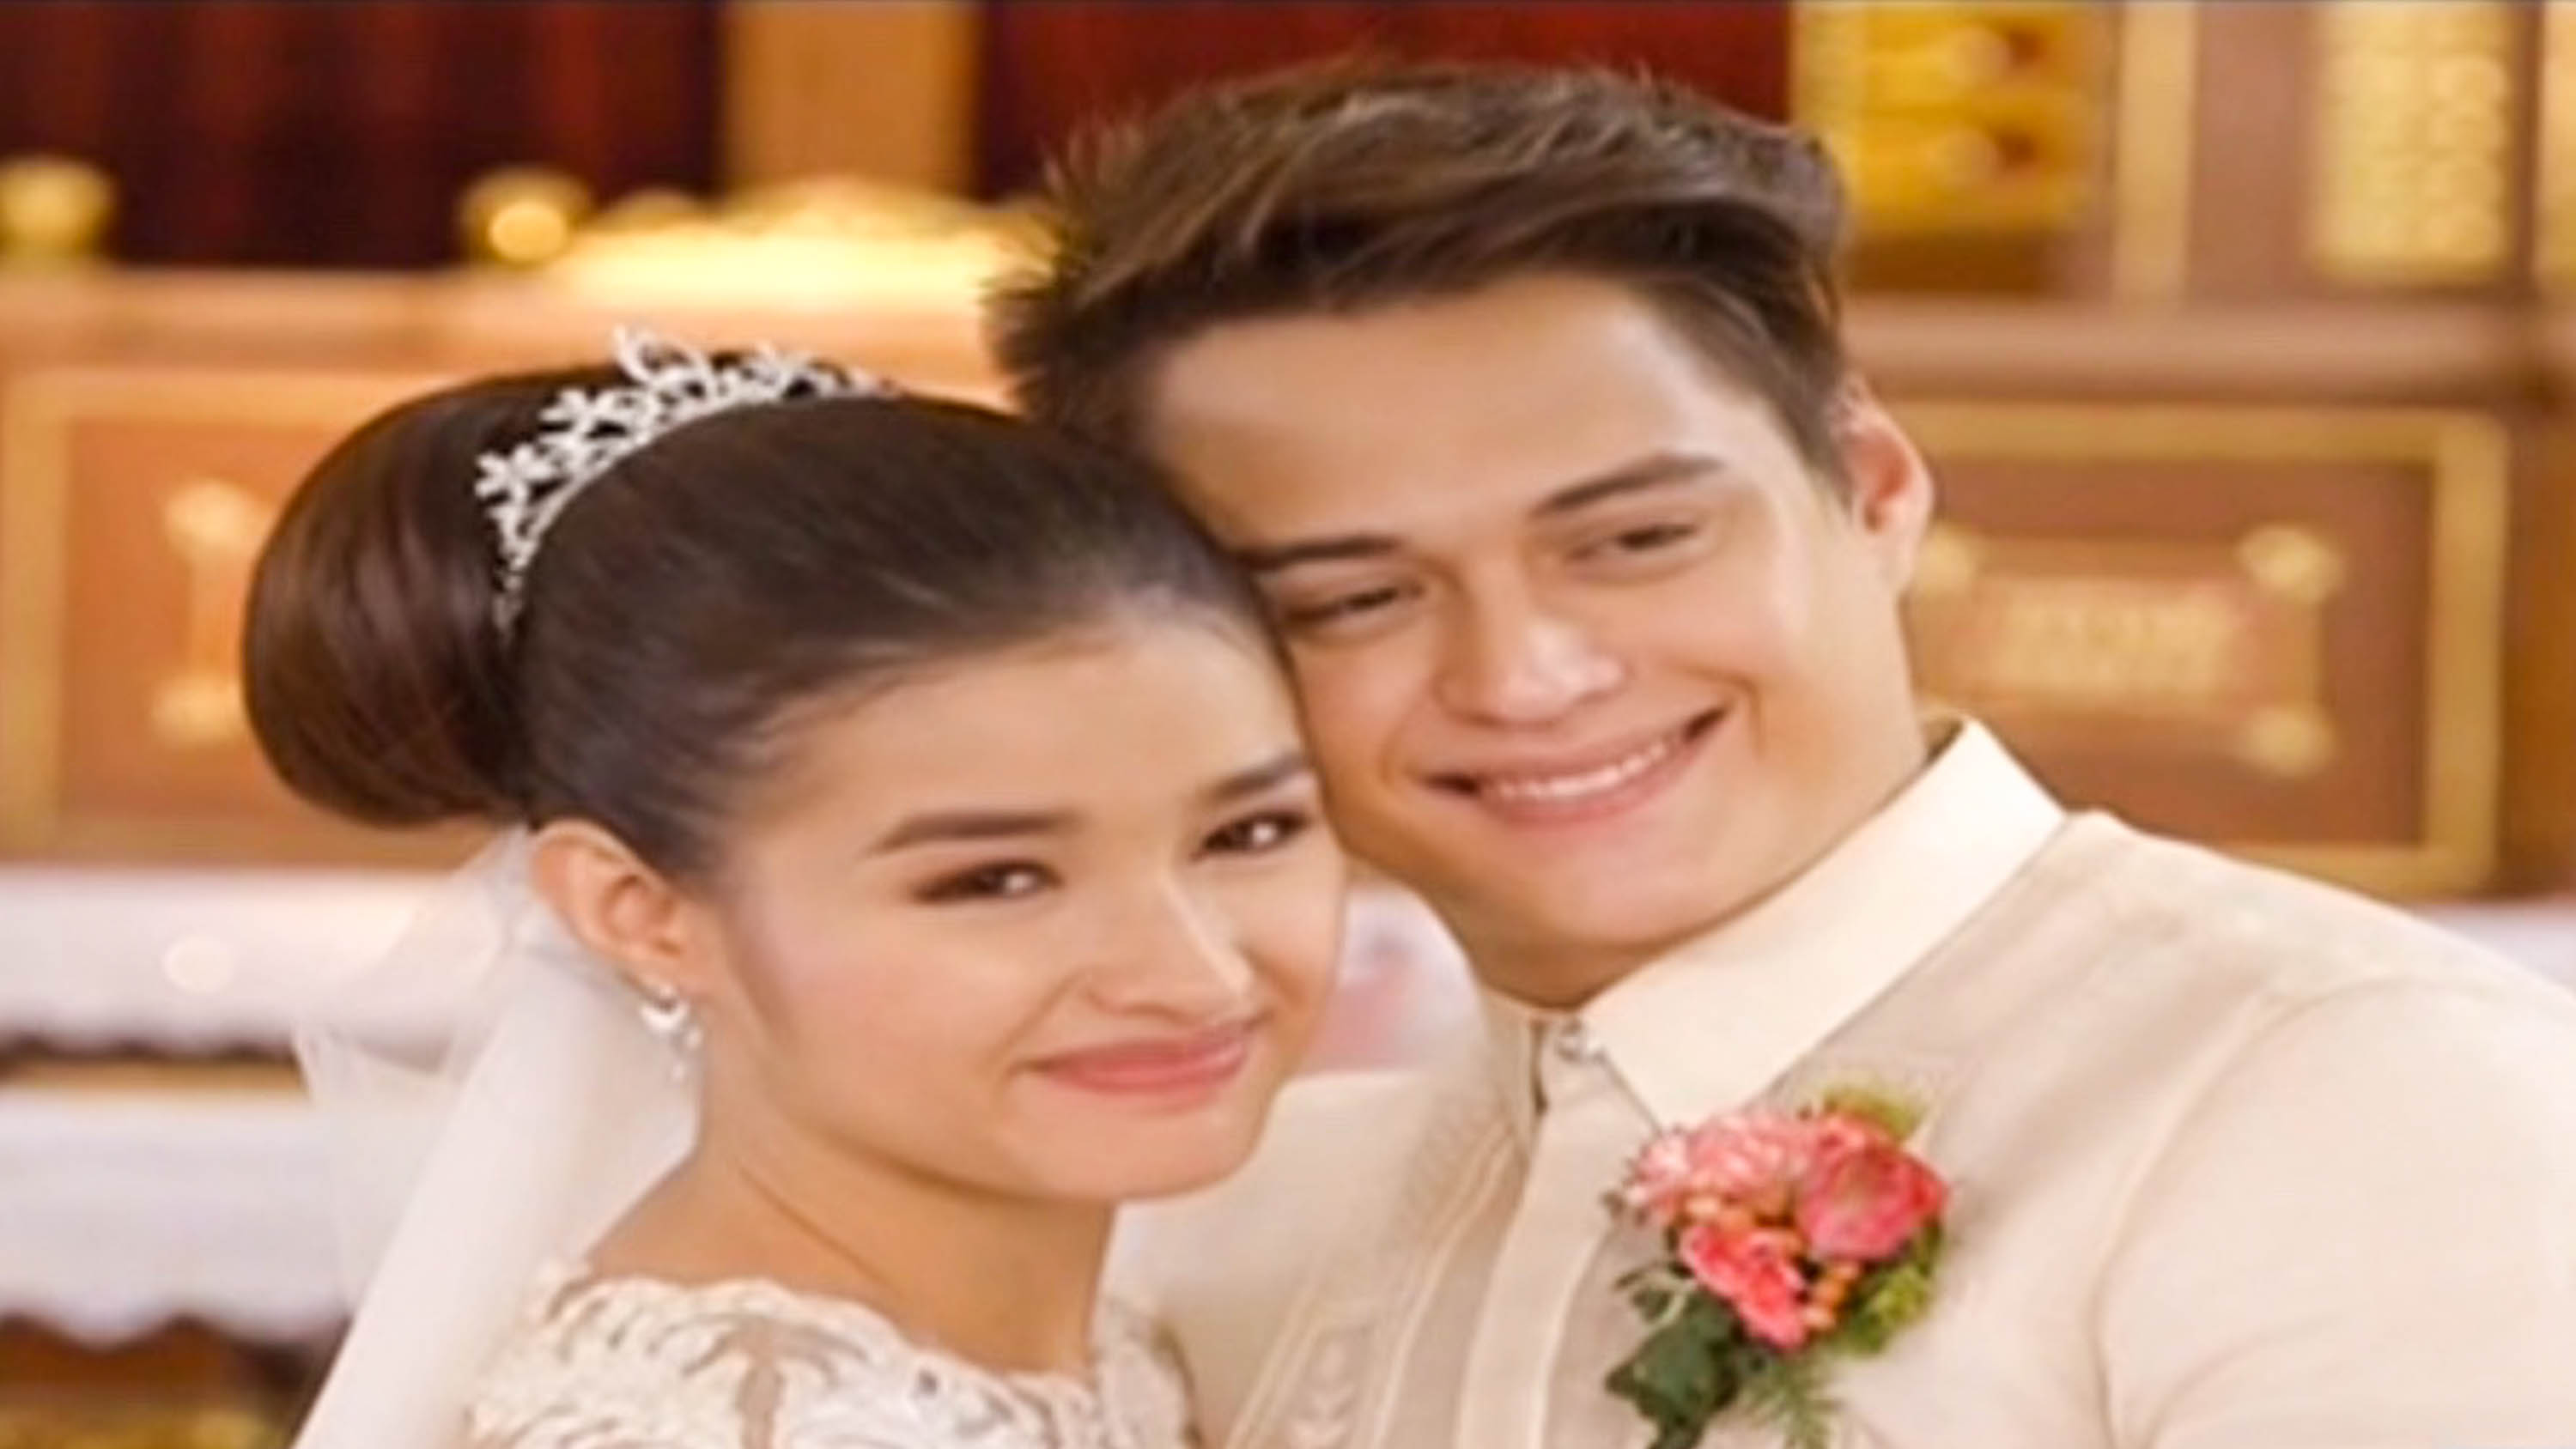 dolce amore finale full episode download